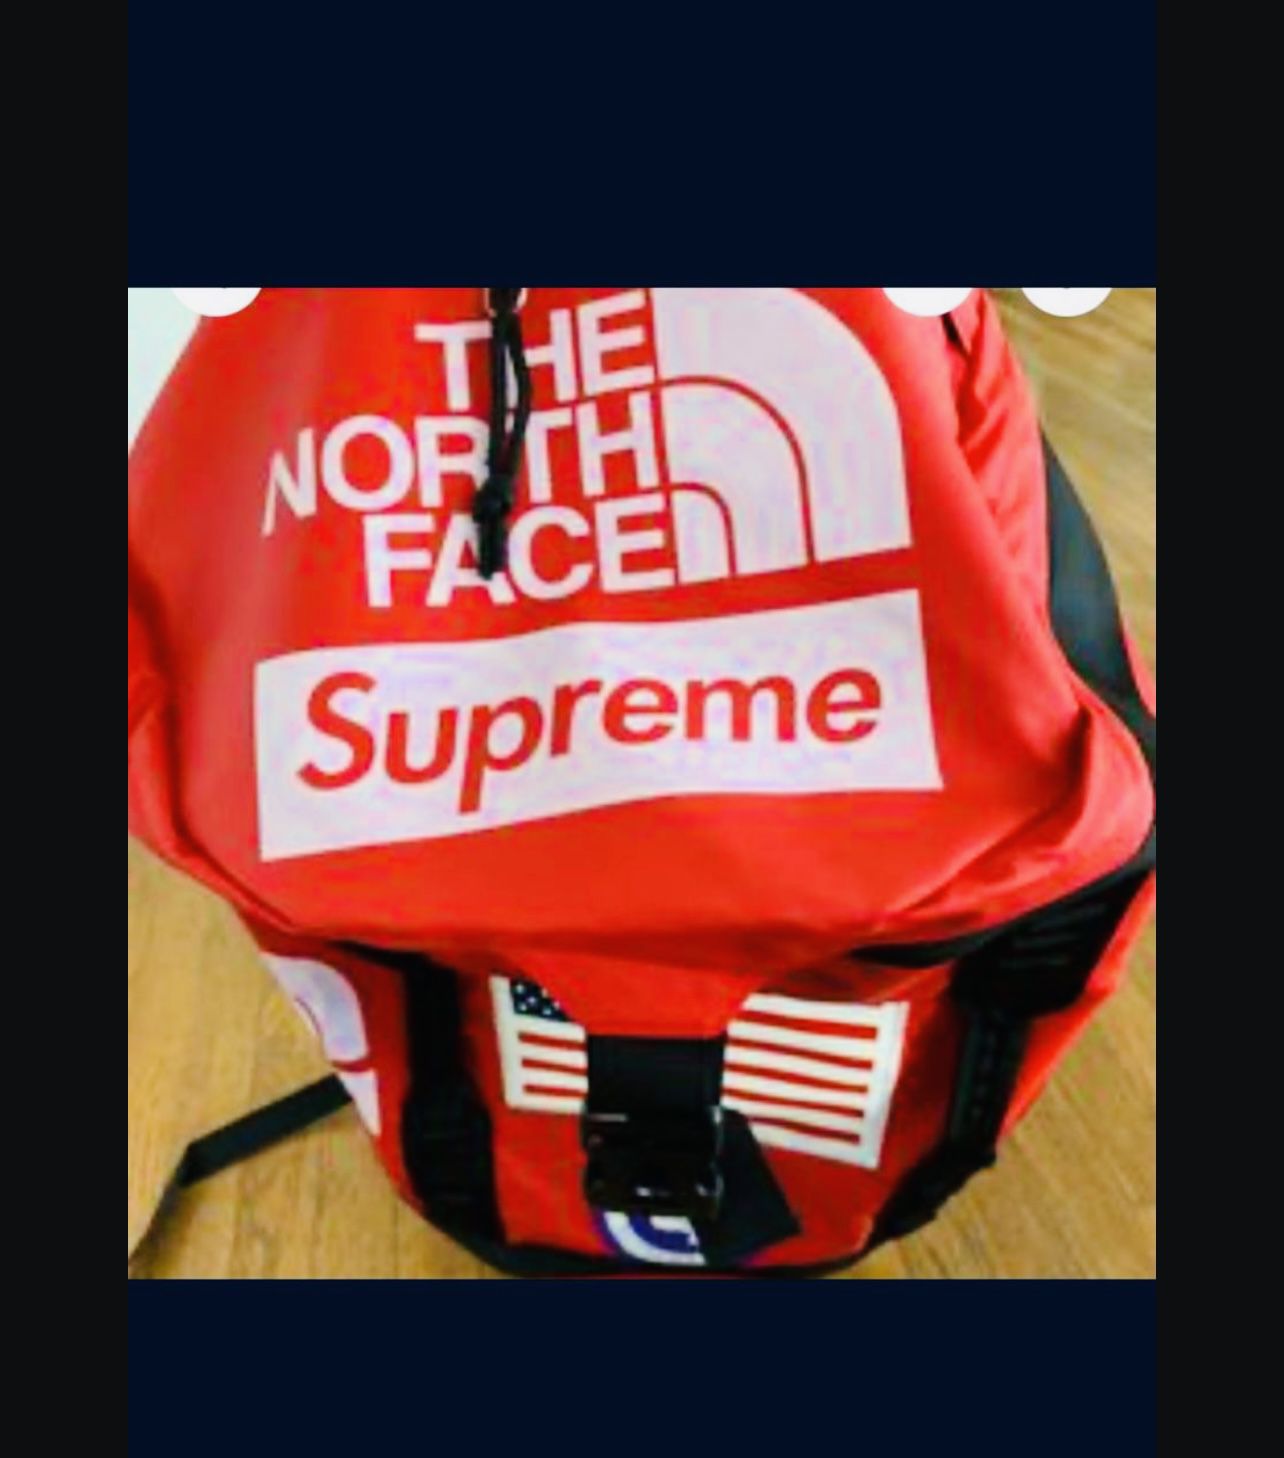 North face supreme Backpack Duffle Bag  brand New 